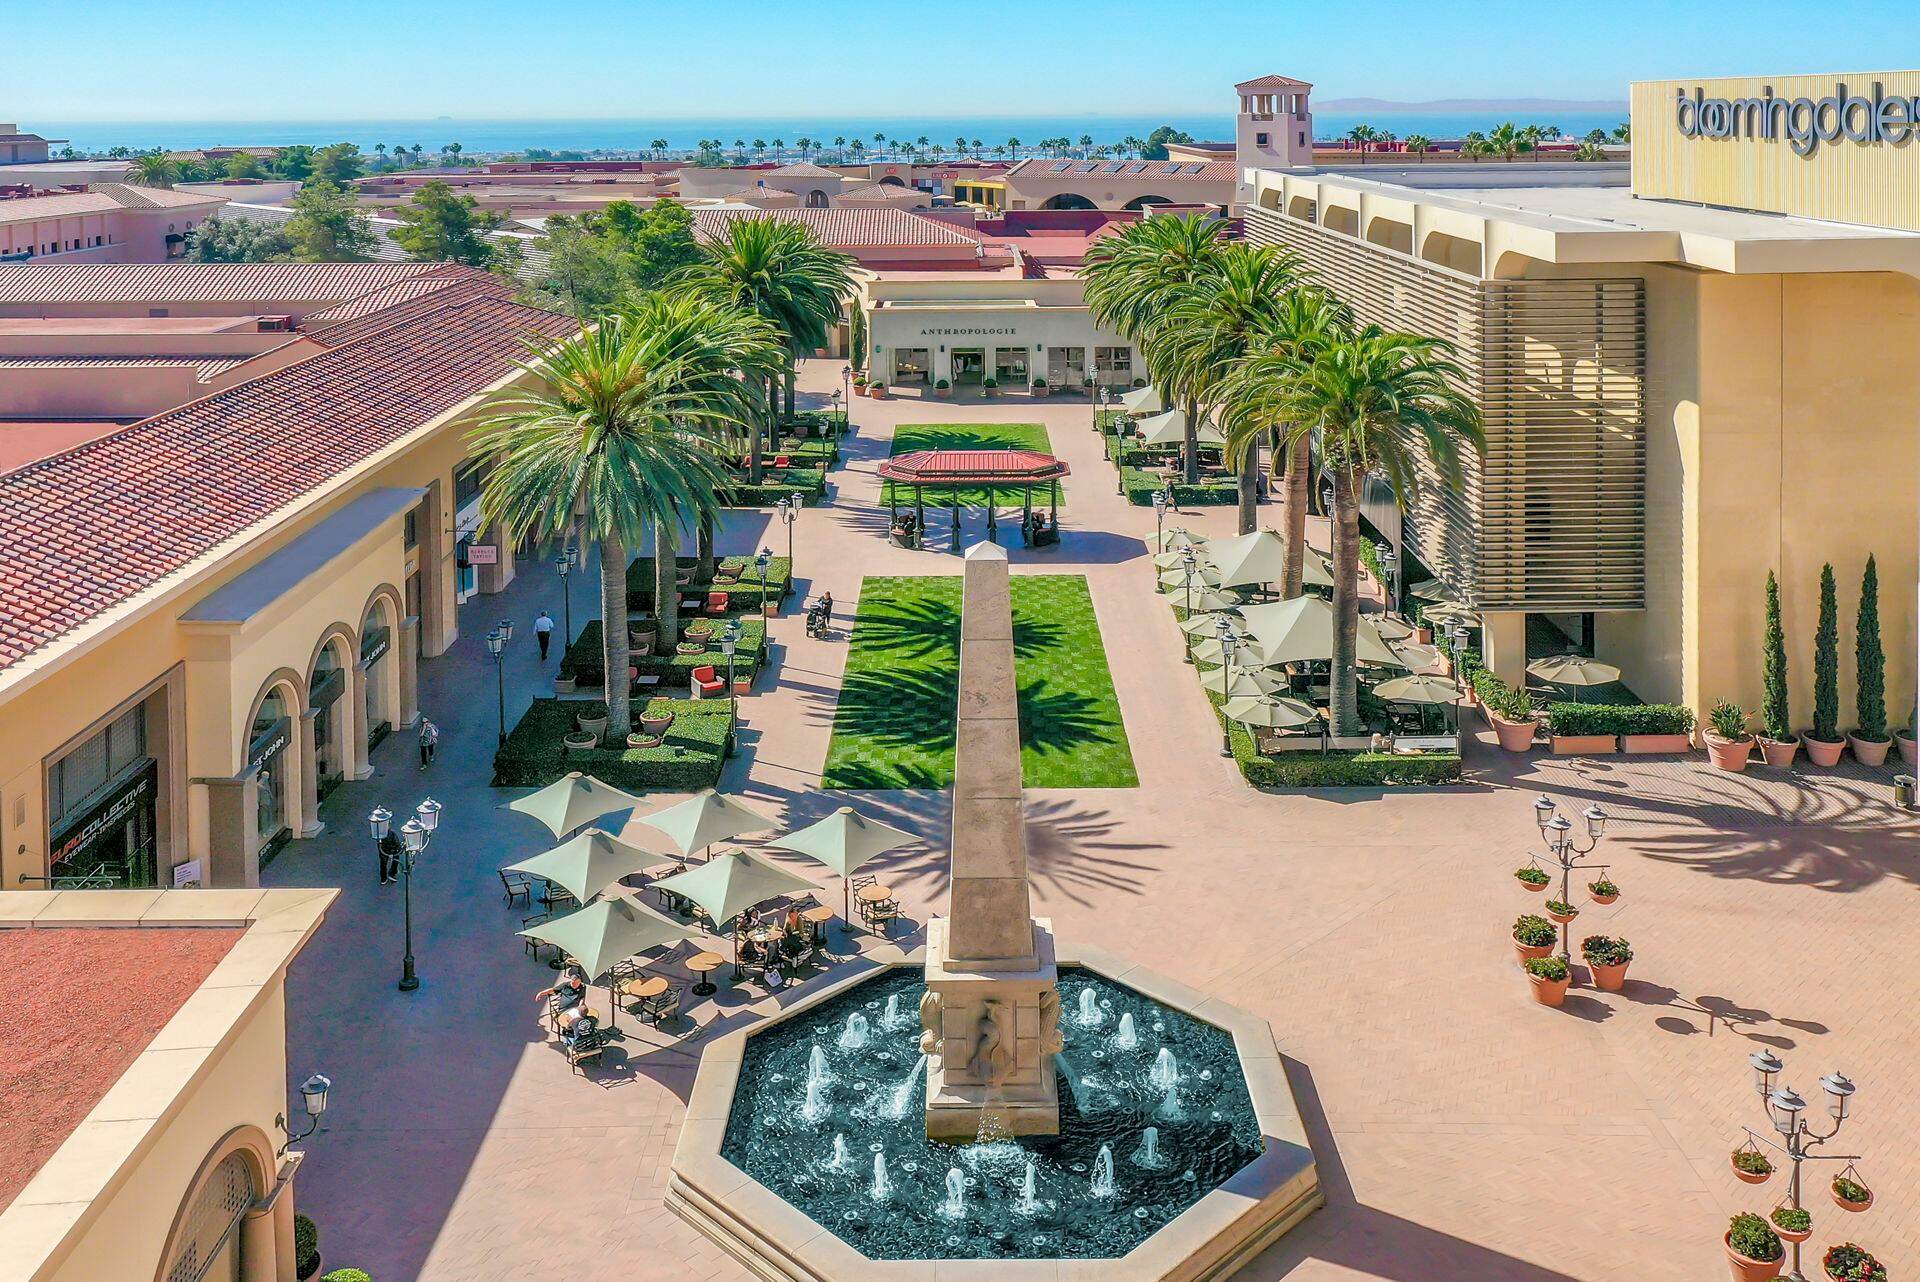 Fashion Valley Mall - Rental With a View: San Diego's Premier